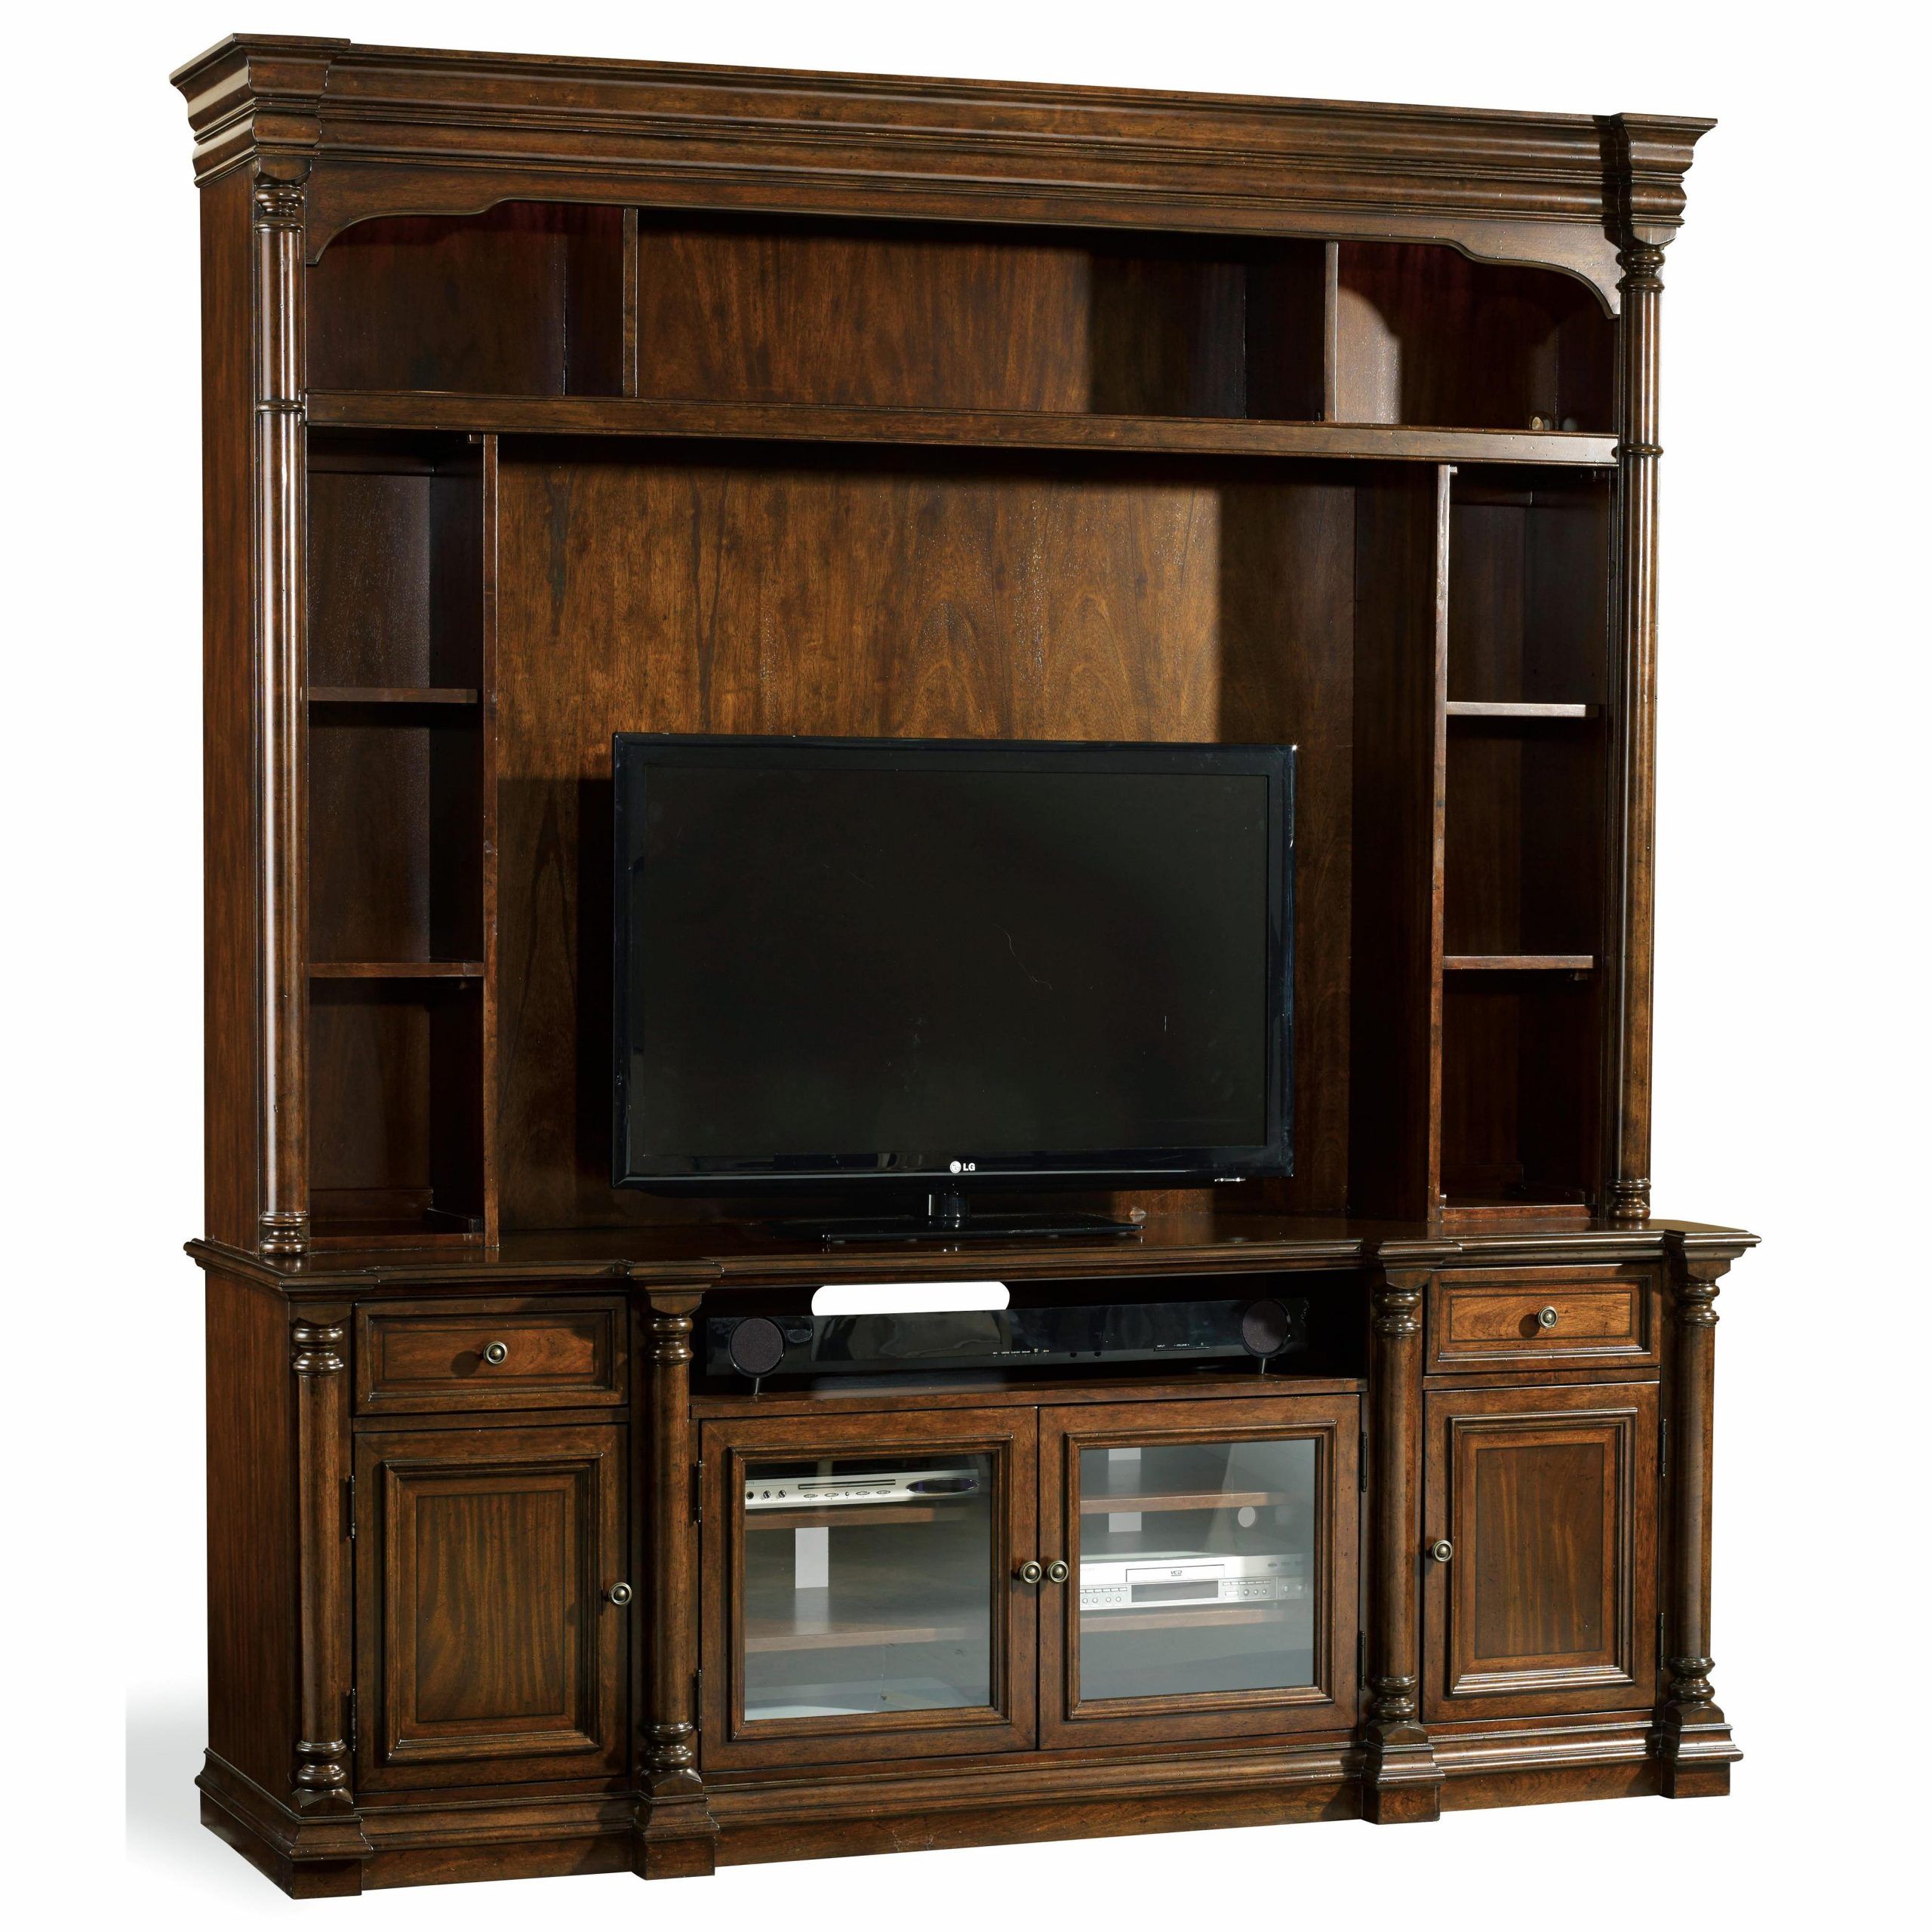 Hooker Furniture Leesburg 5381 55484 Entertainment Console Within Cream Color Tv Stands (View 11 of 15)